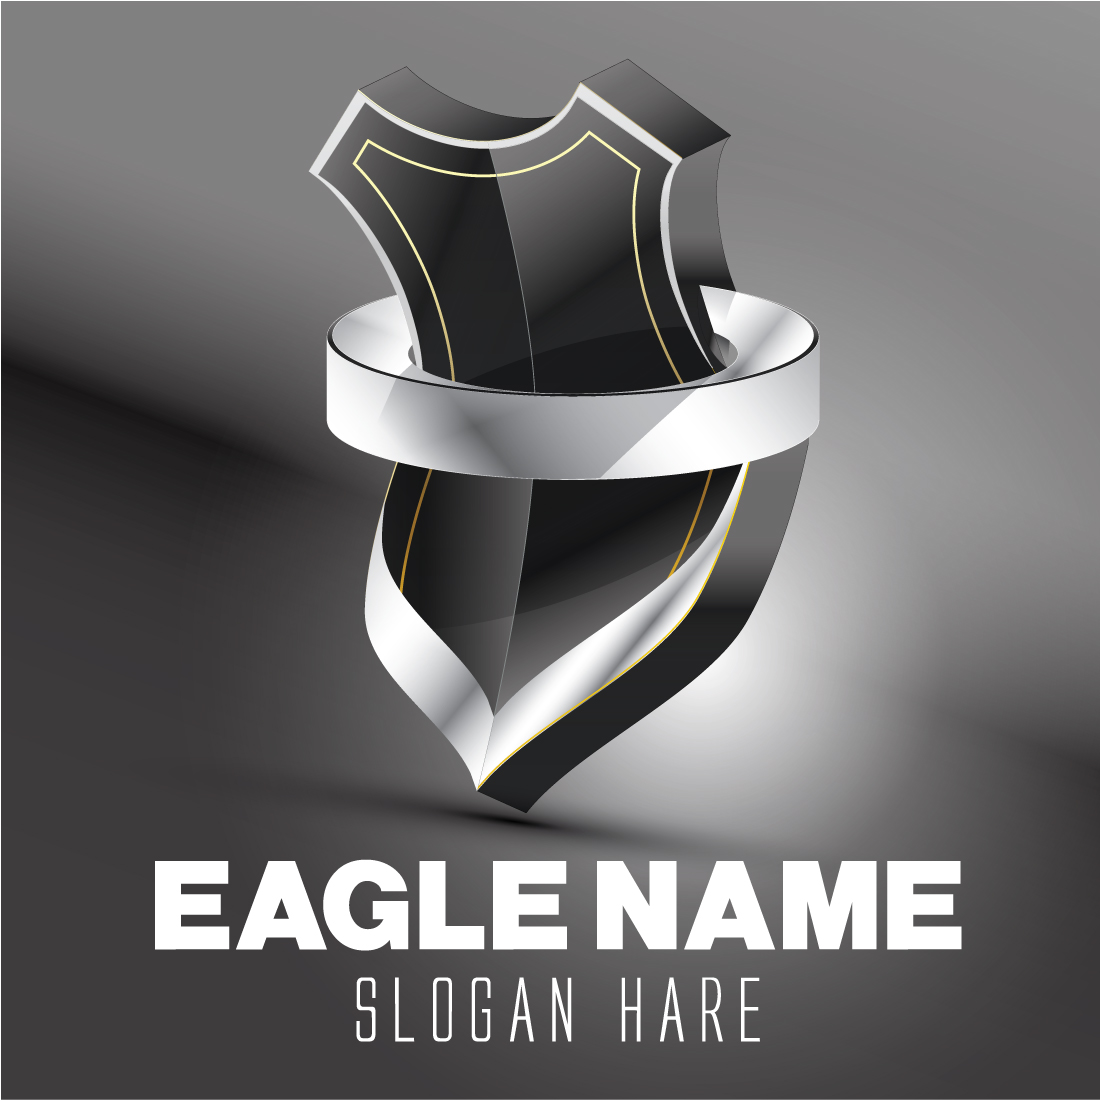 isolated shield 3D vector design Create your own text on ribbon preview image.